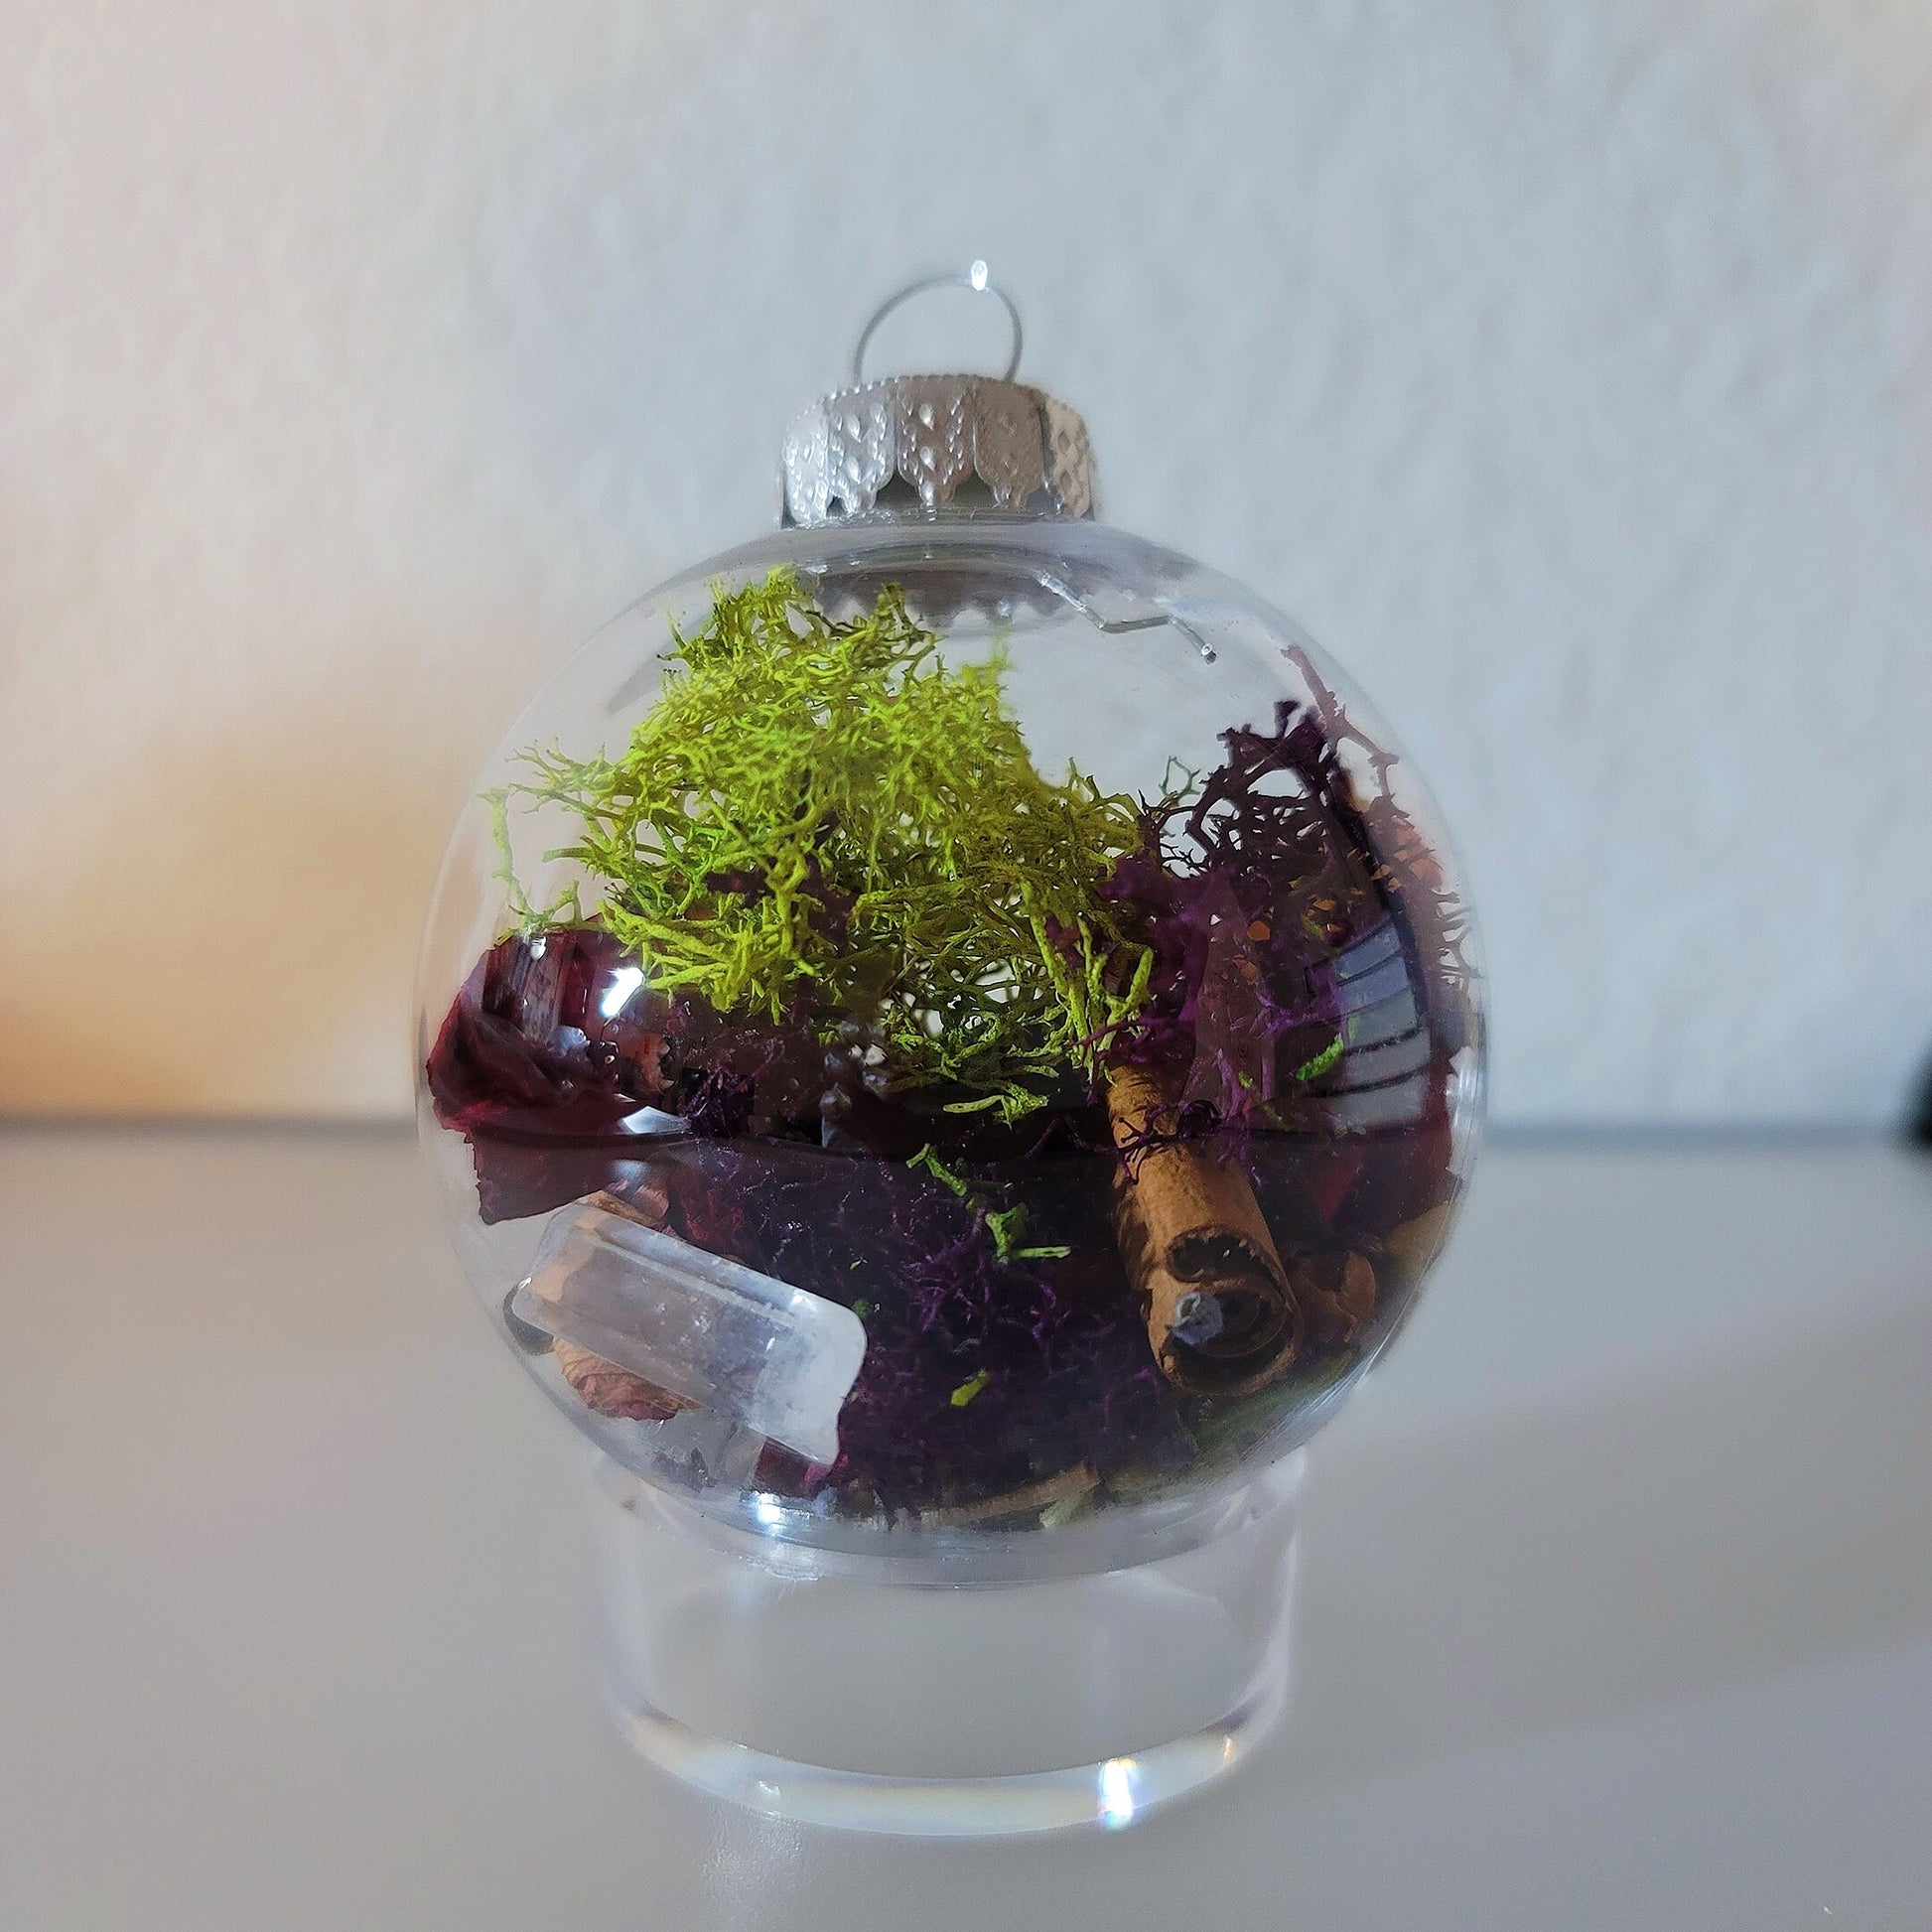 Witch Ball - Yule Ornament - Witches Amulet, Protection - Witchy Home Decor